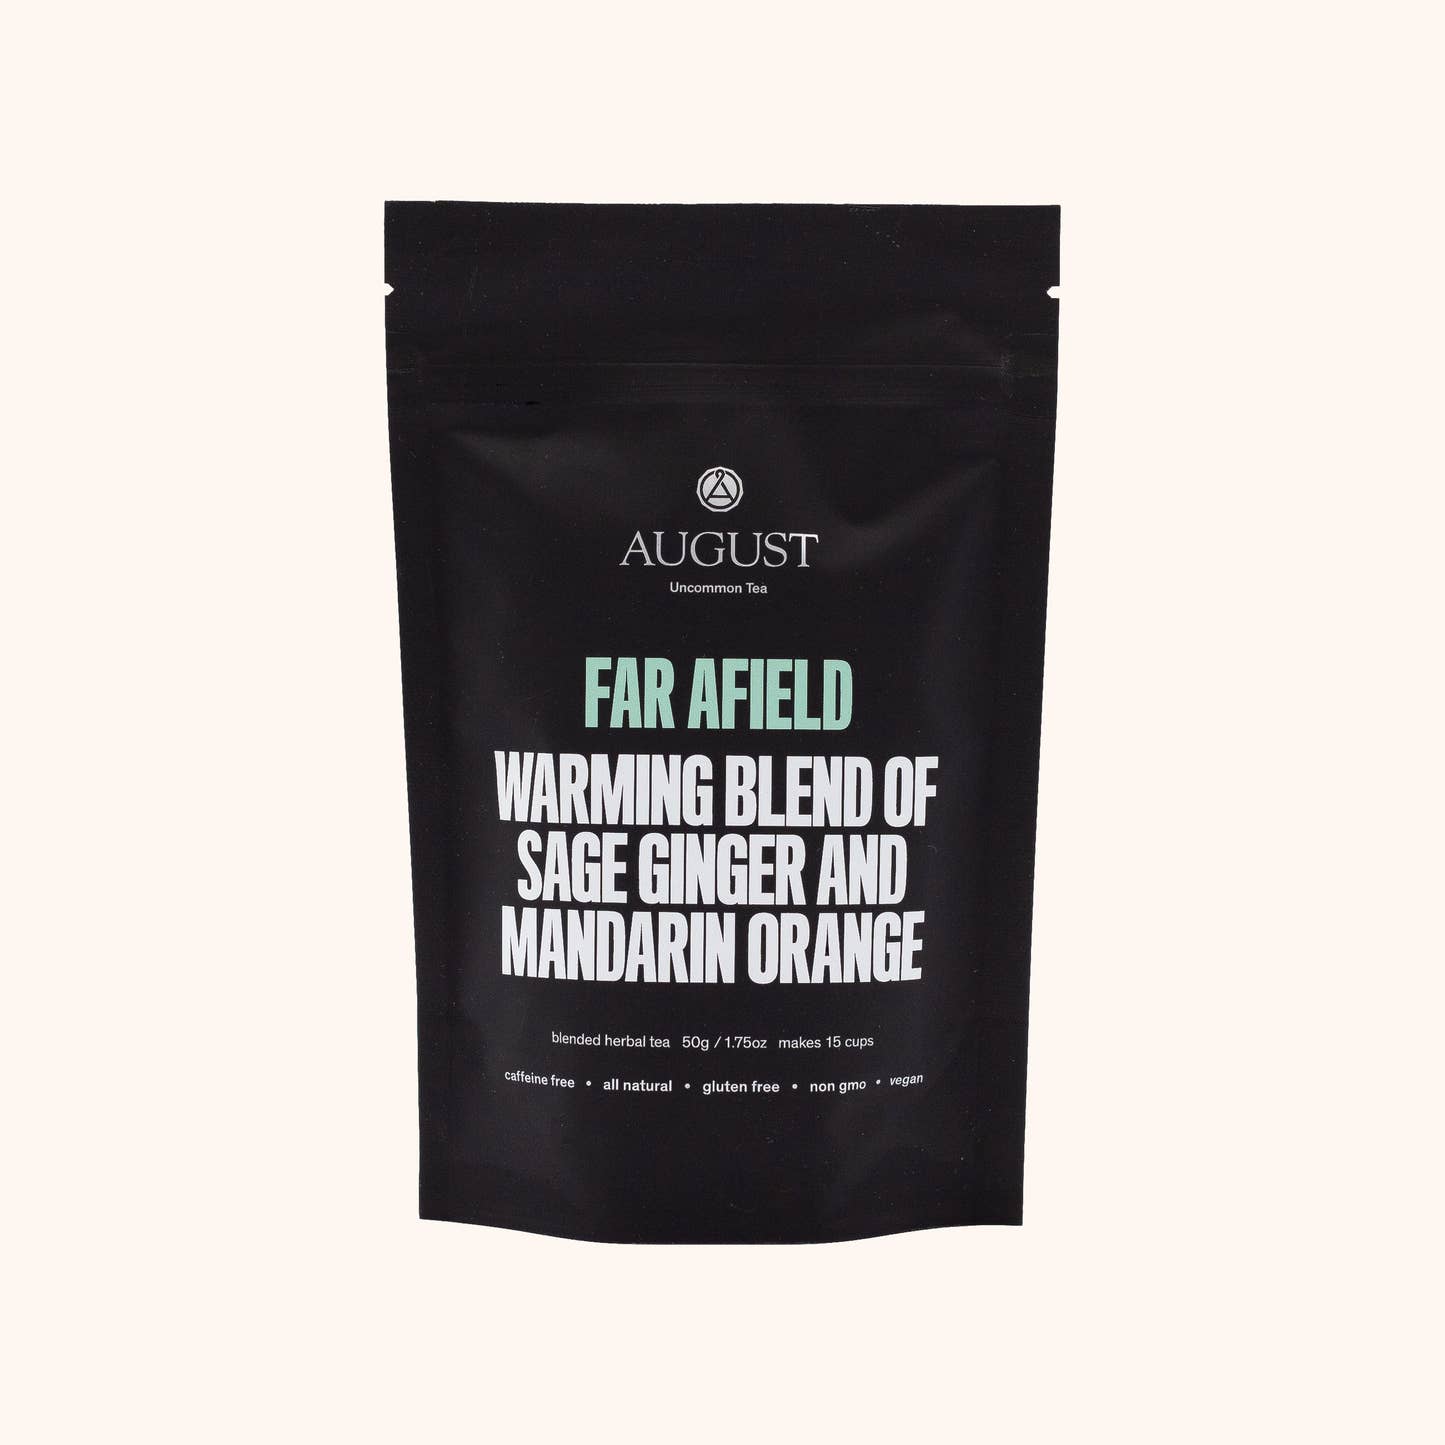 Far Afield by August Uncommon loose leaf herbal tea pouch